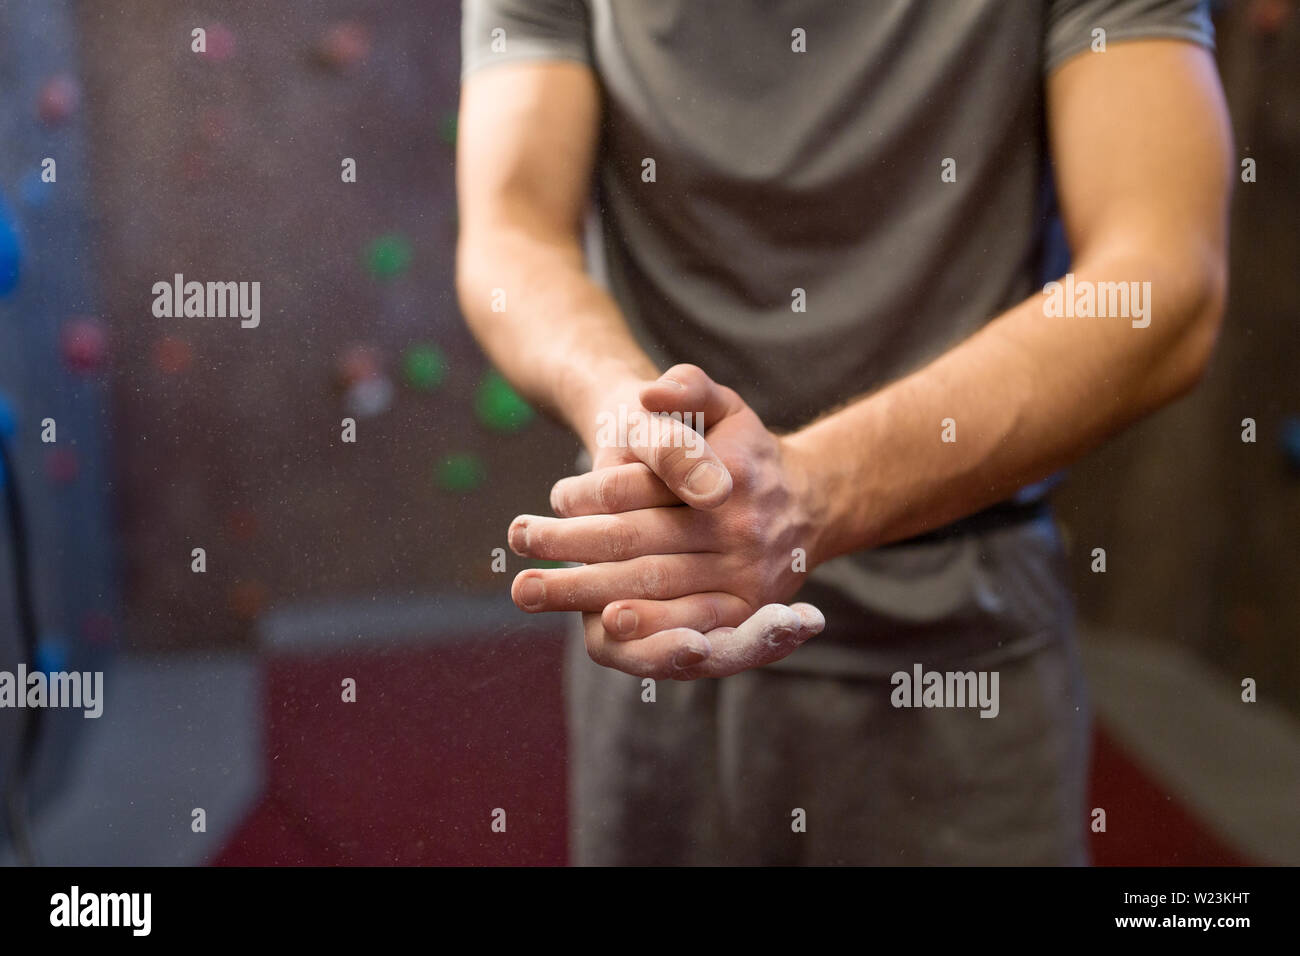 male climber drying hands at indoor climbing gym Stock Photo